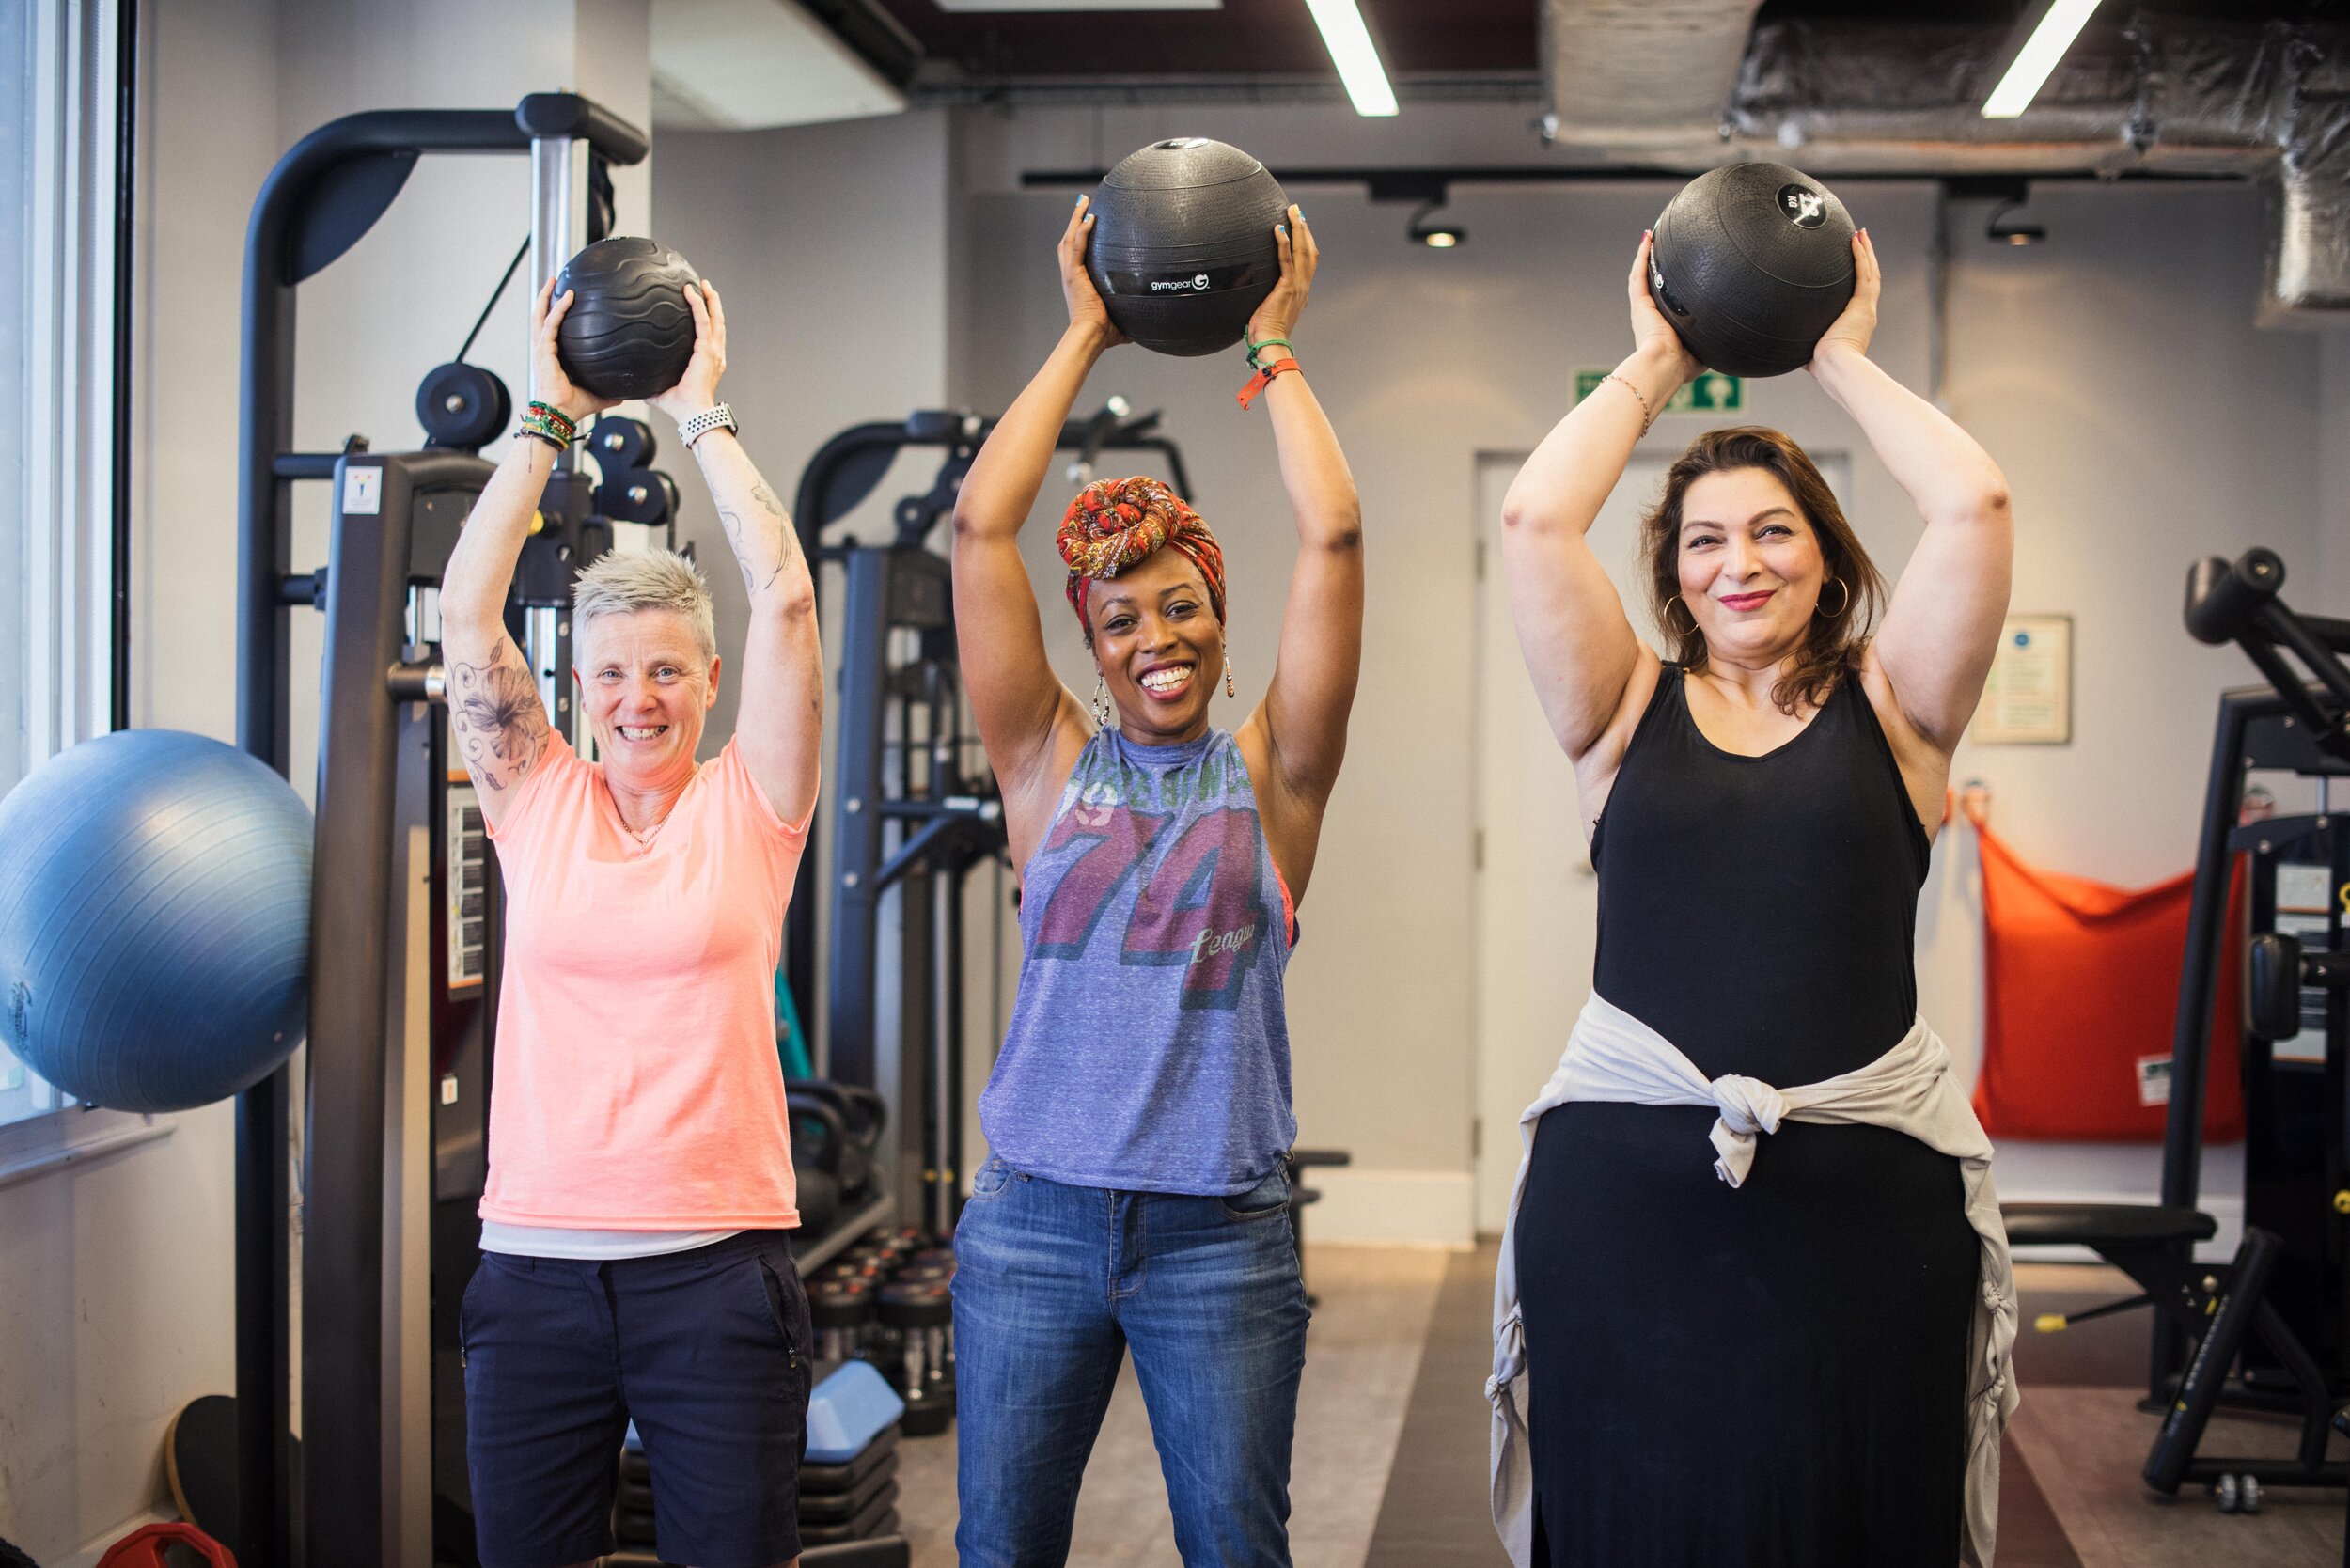 Our gym offers a space exclusively for women to work out with ease